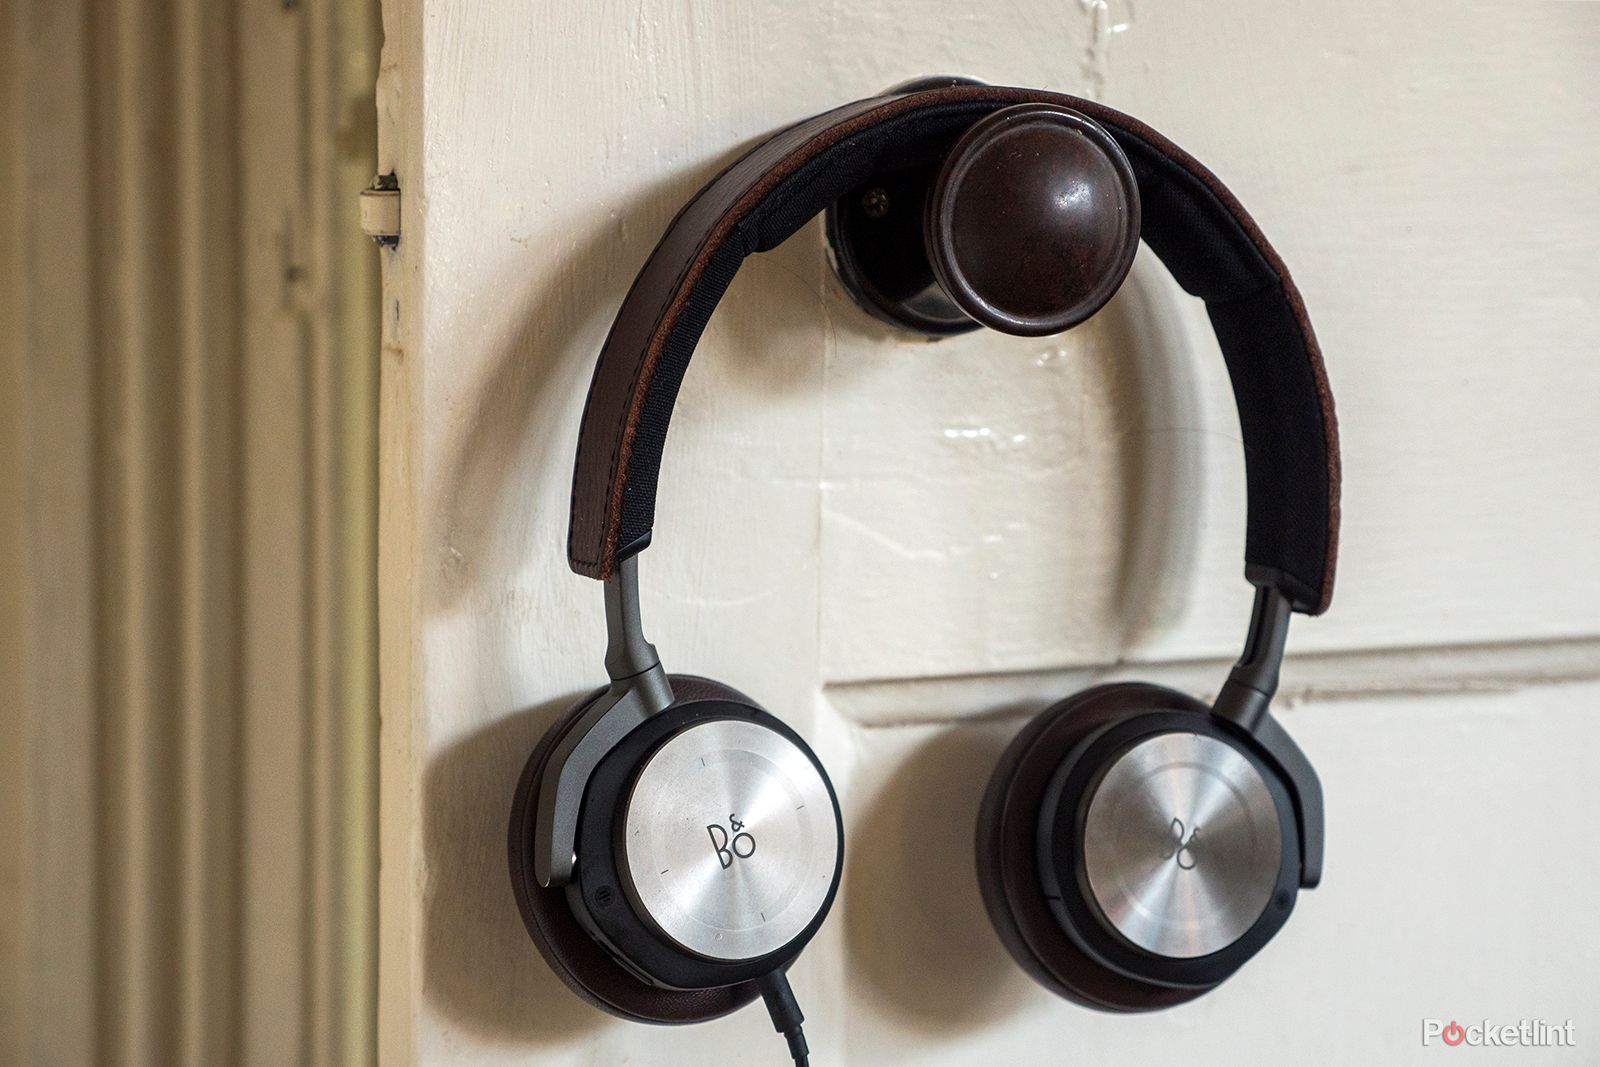 Bang & Olufsen BeoPlay H8 review: Bang & Oh the price